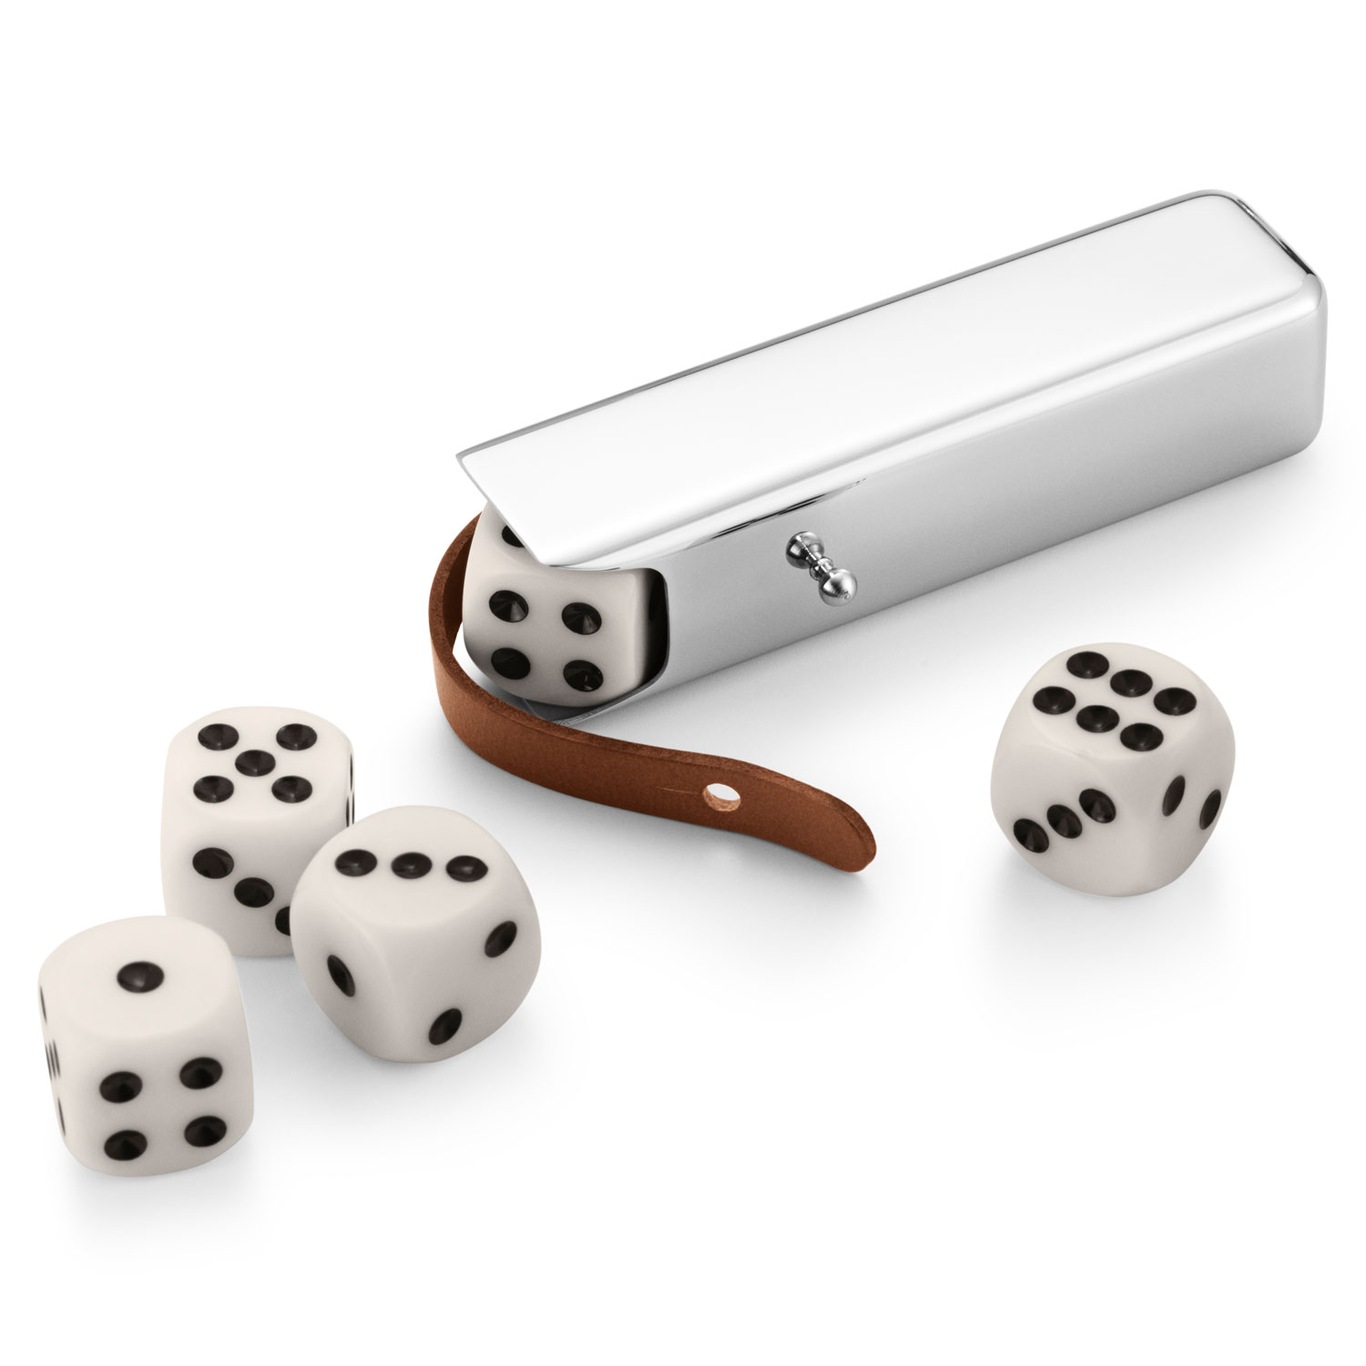 Sky Dice Case Game Container With Dices, Stainless Steel / Leather